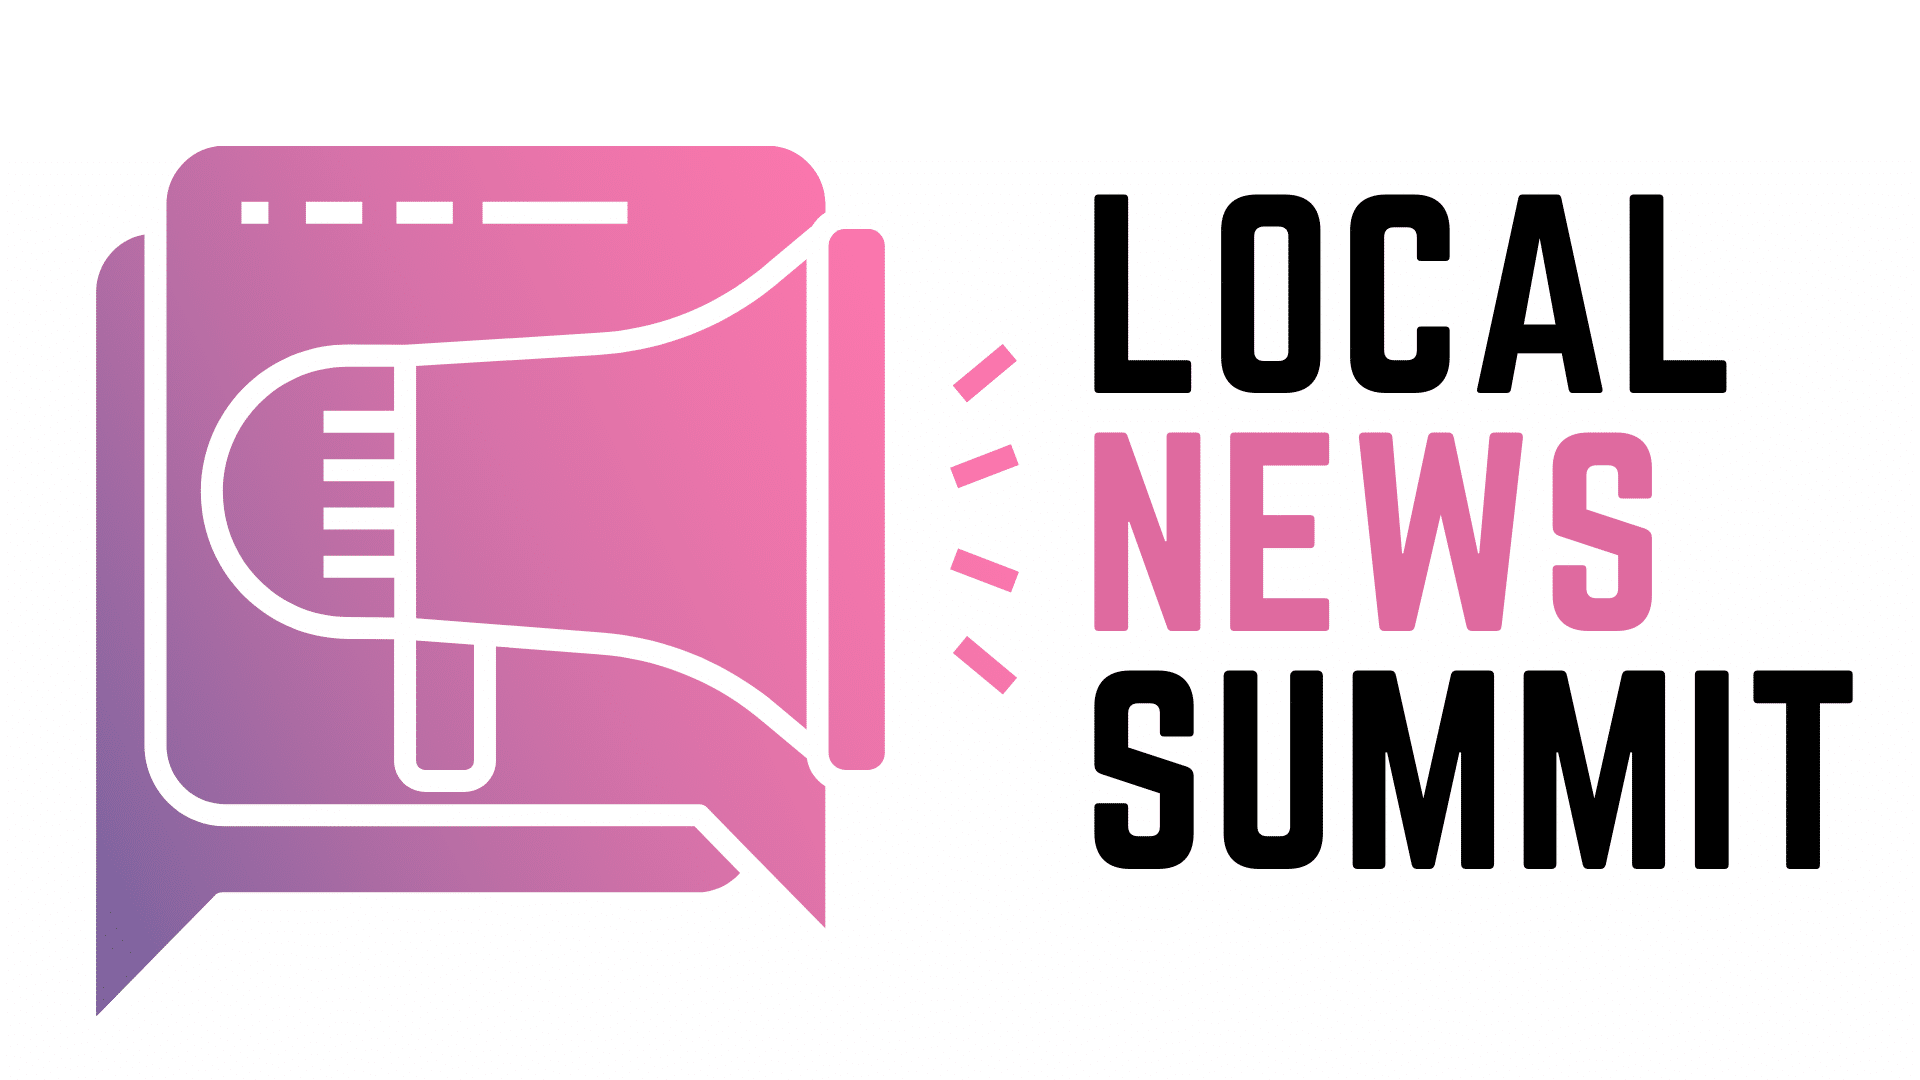 Decoration only: A white background with a pink and purple icon in the shape of a text bubble and a megaphone, next to the words "LOCAL NEWS SUMMIT" in all-caps.